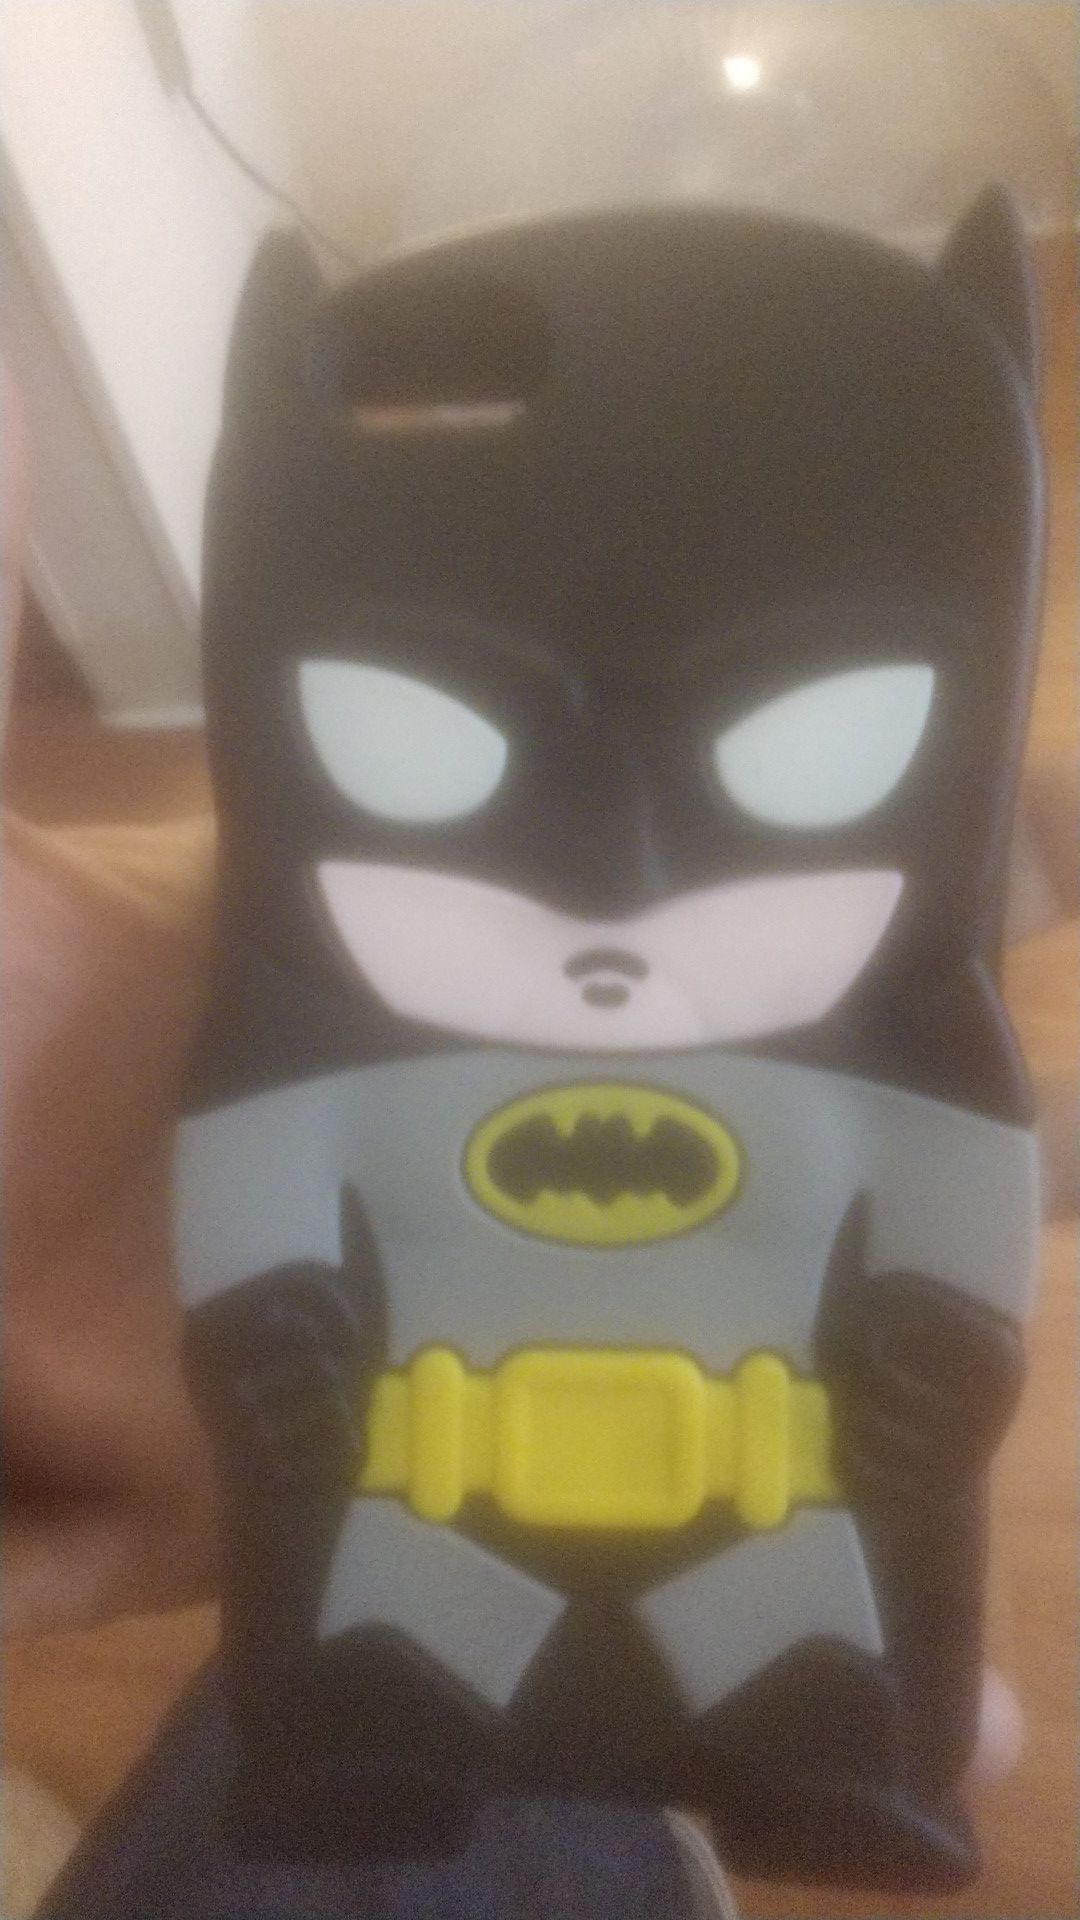 Phone cover/cell phone case